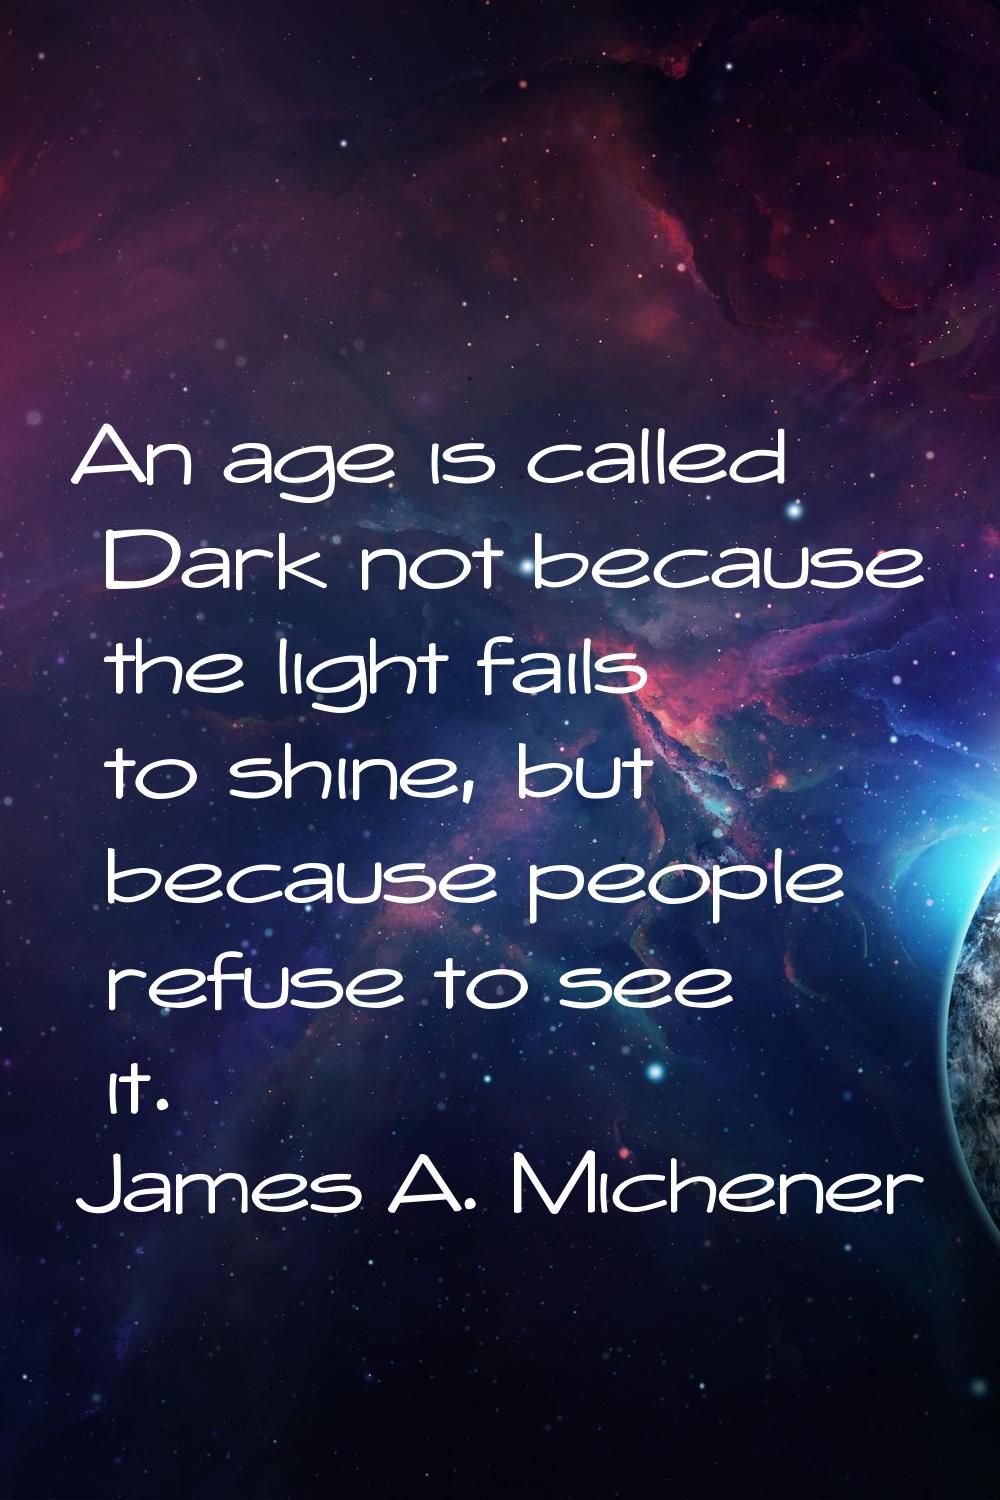 An age is called Dark not because the light fails to shine, but because people refuse to see it.